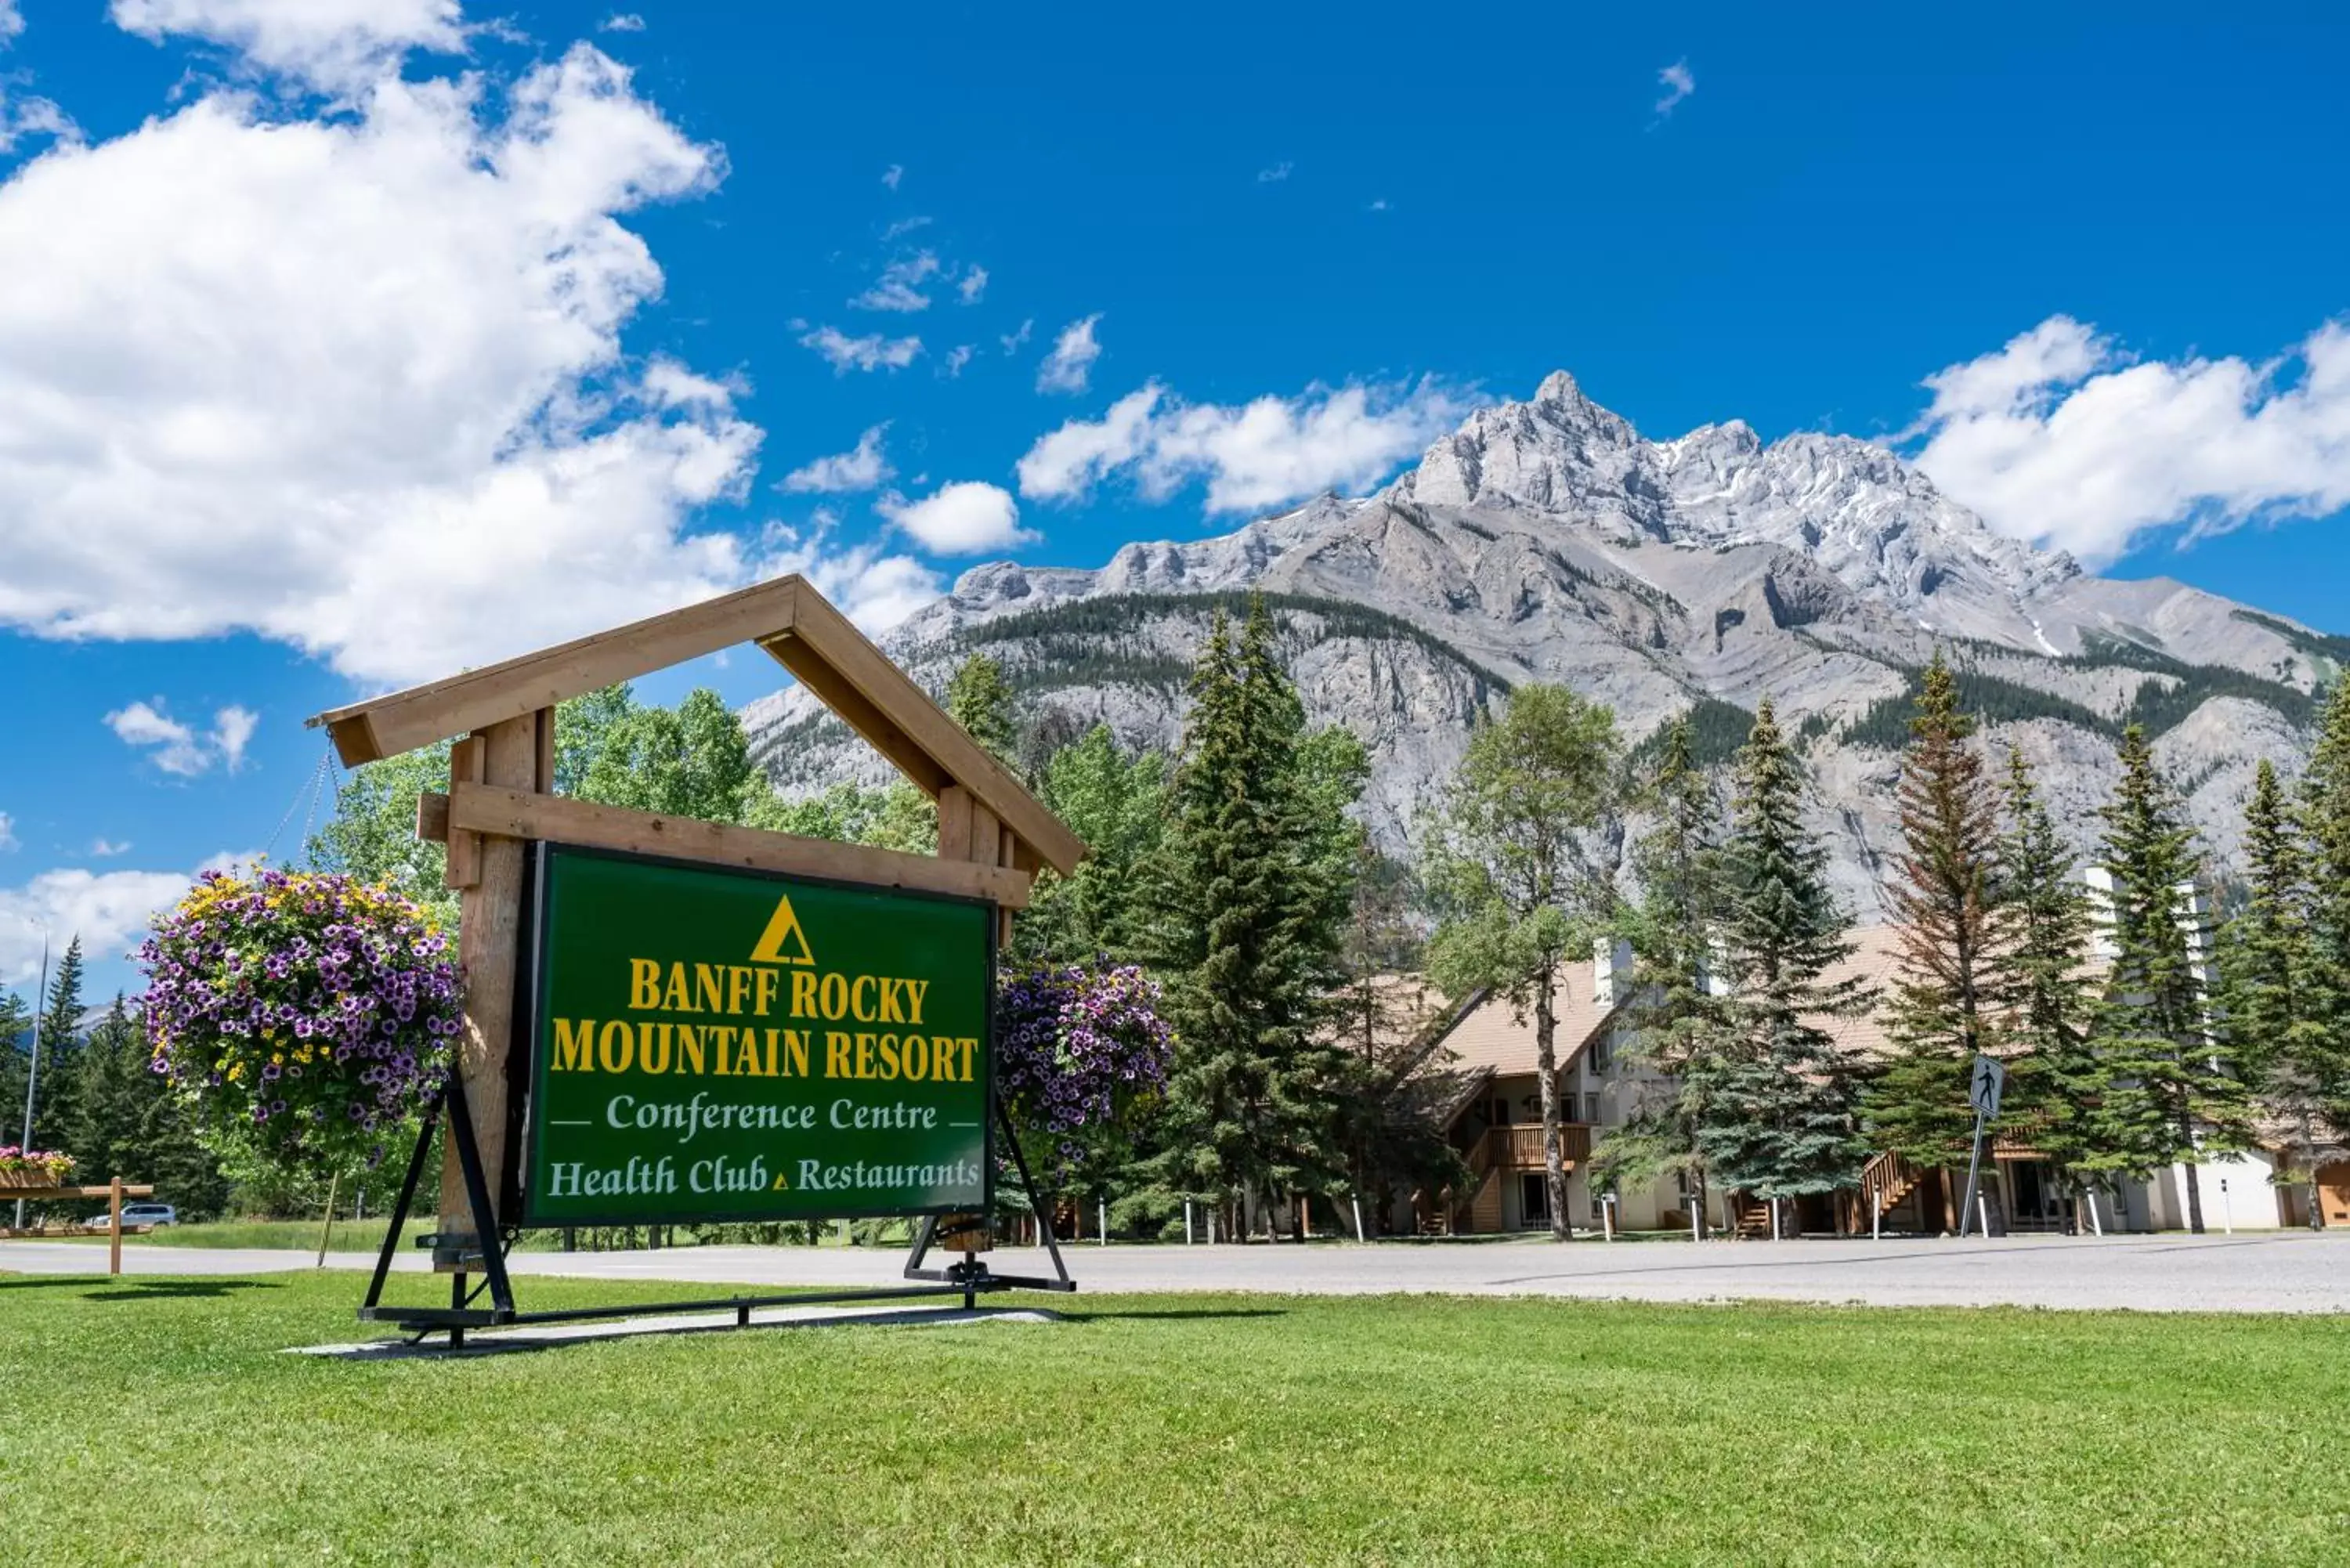 Property logo or sign, Property Building in Banff Rocky Mountain Resort